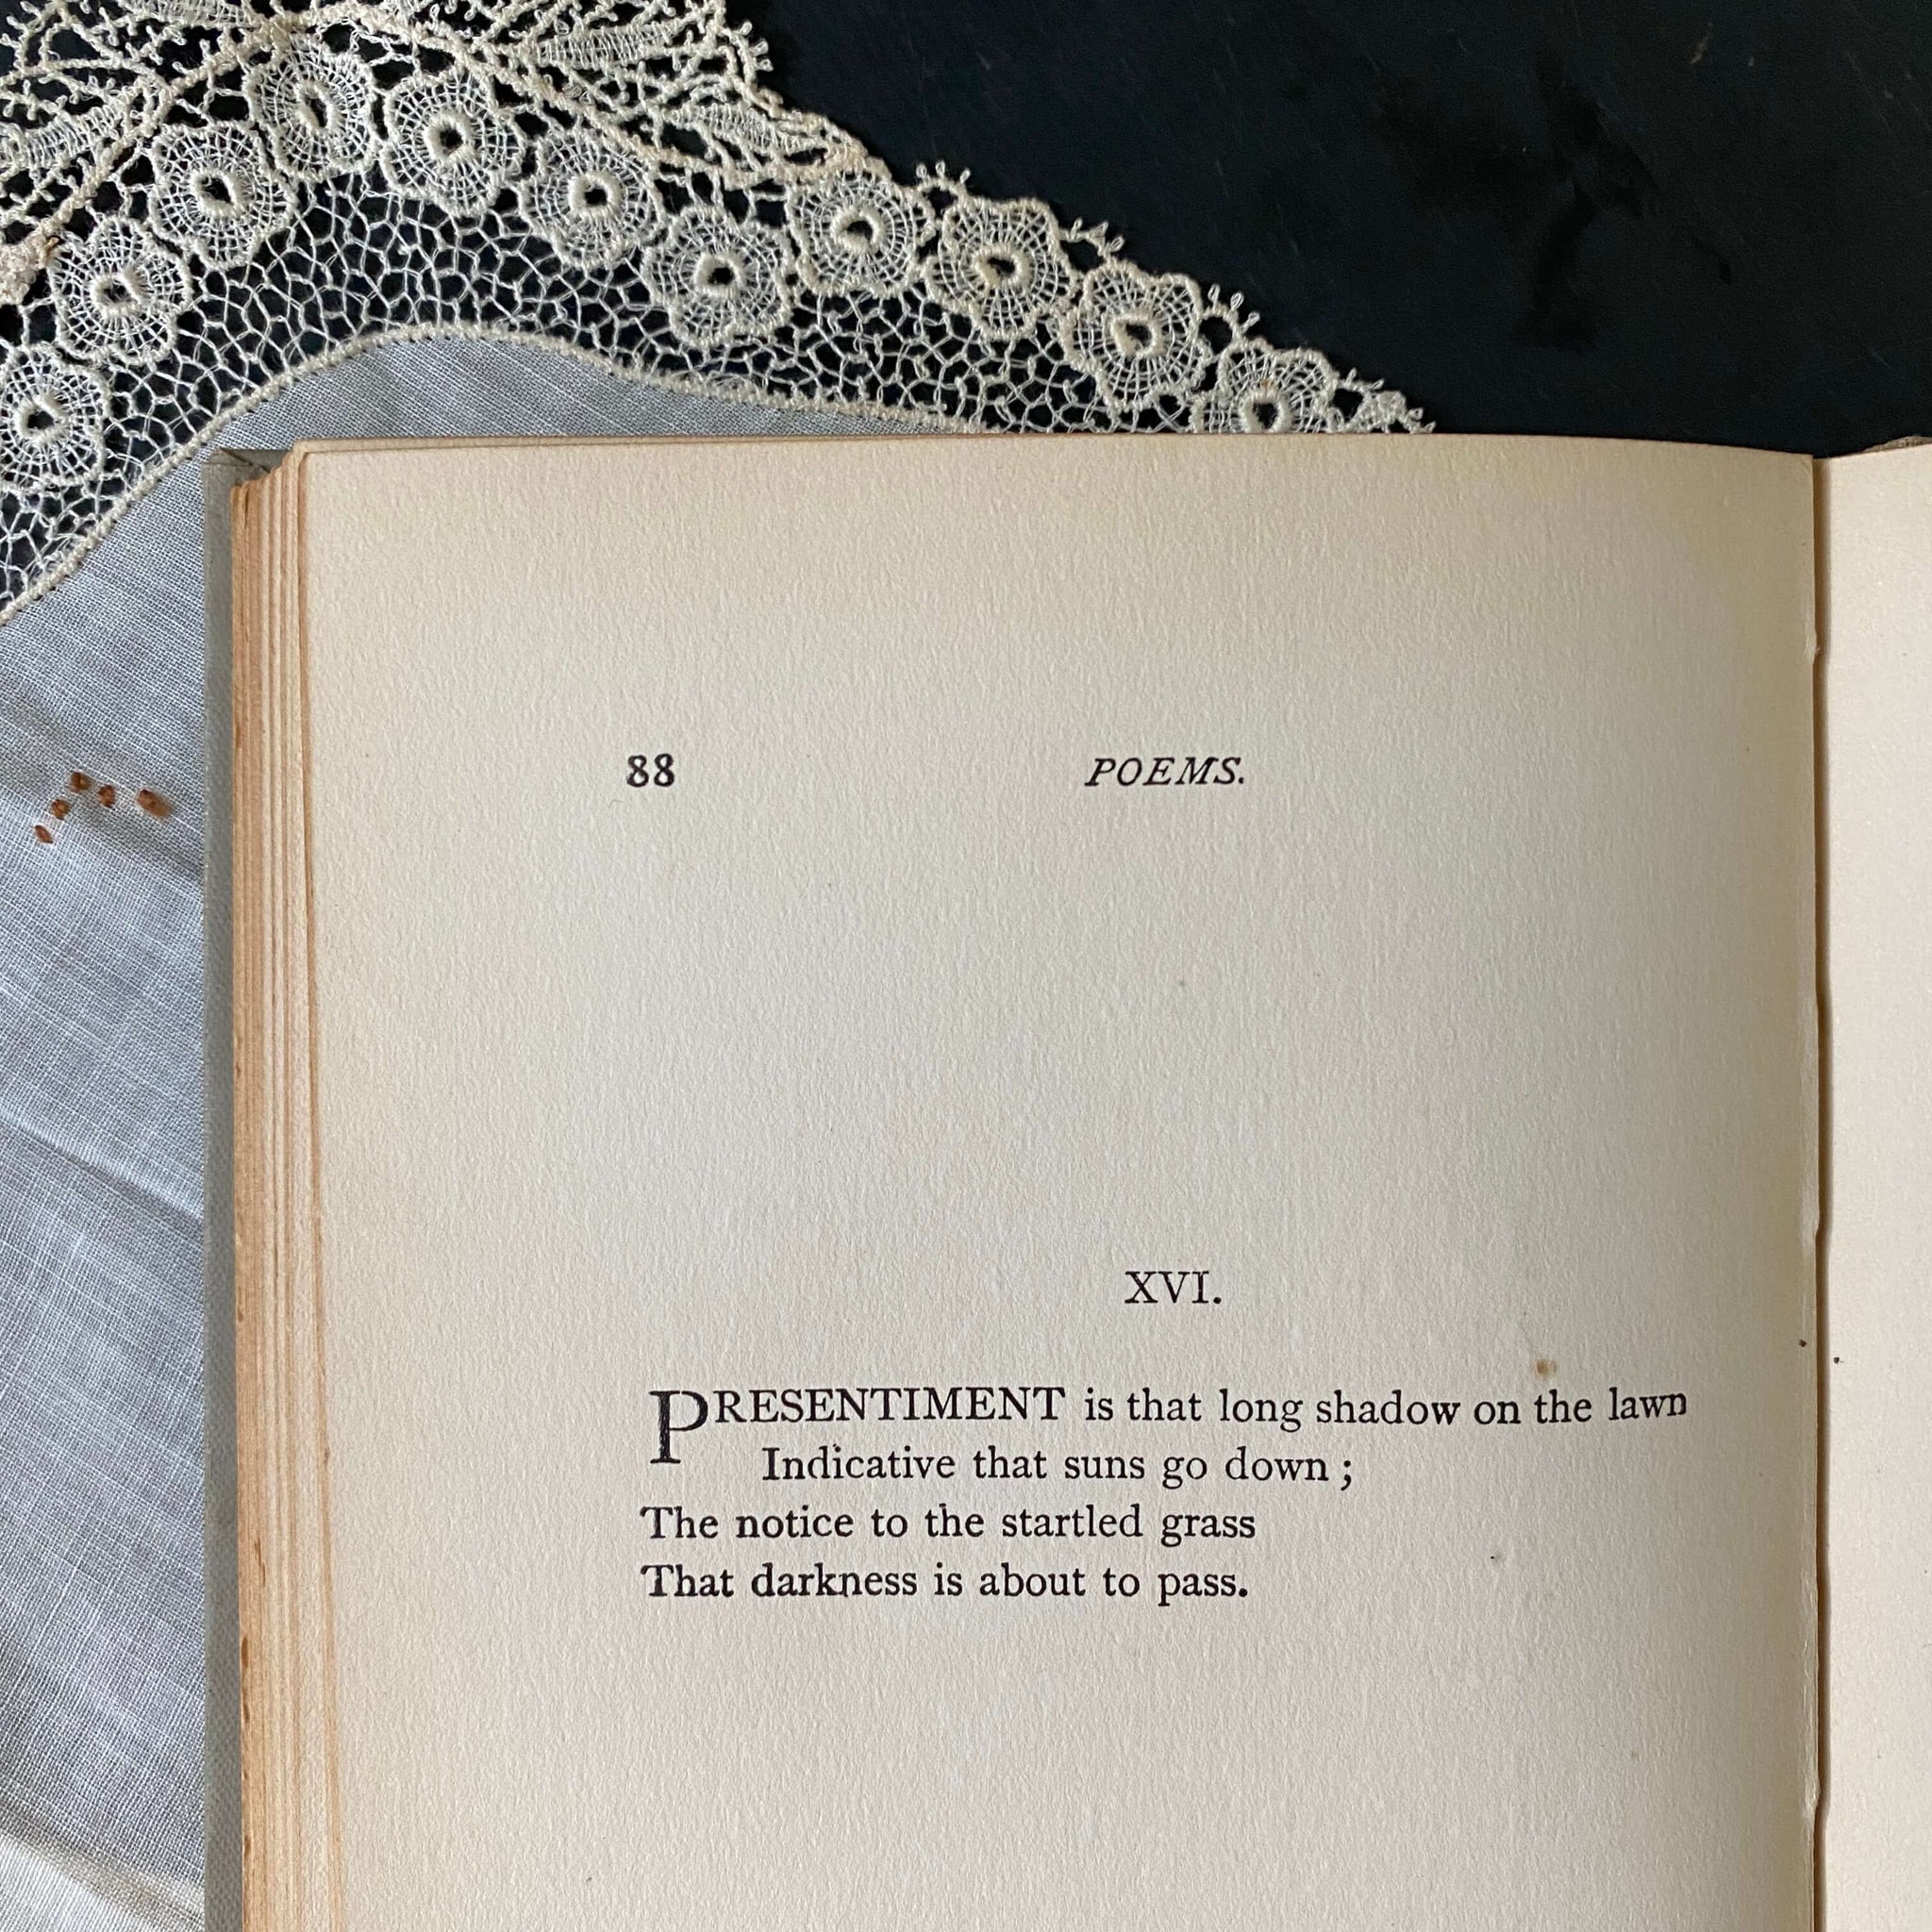 Antique Edition of Poems by Emily Dickinson circa 1915